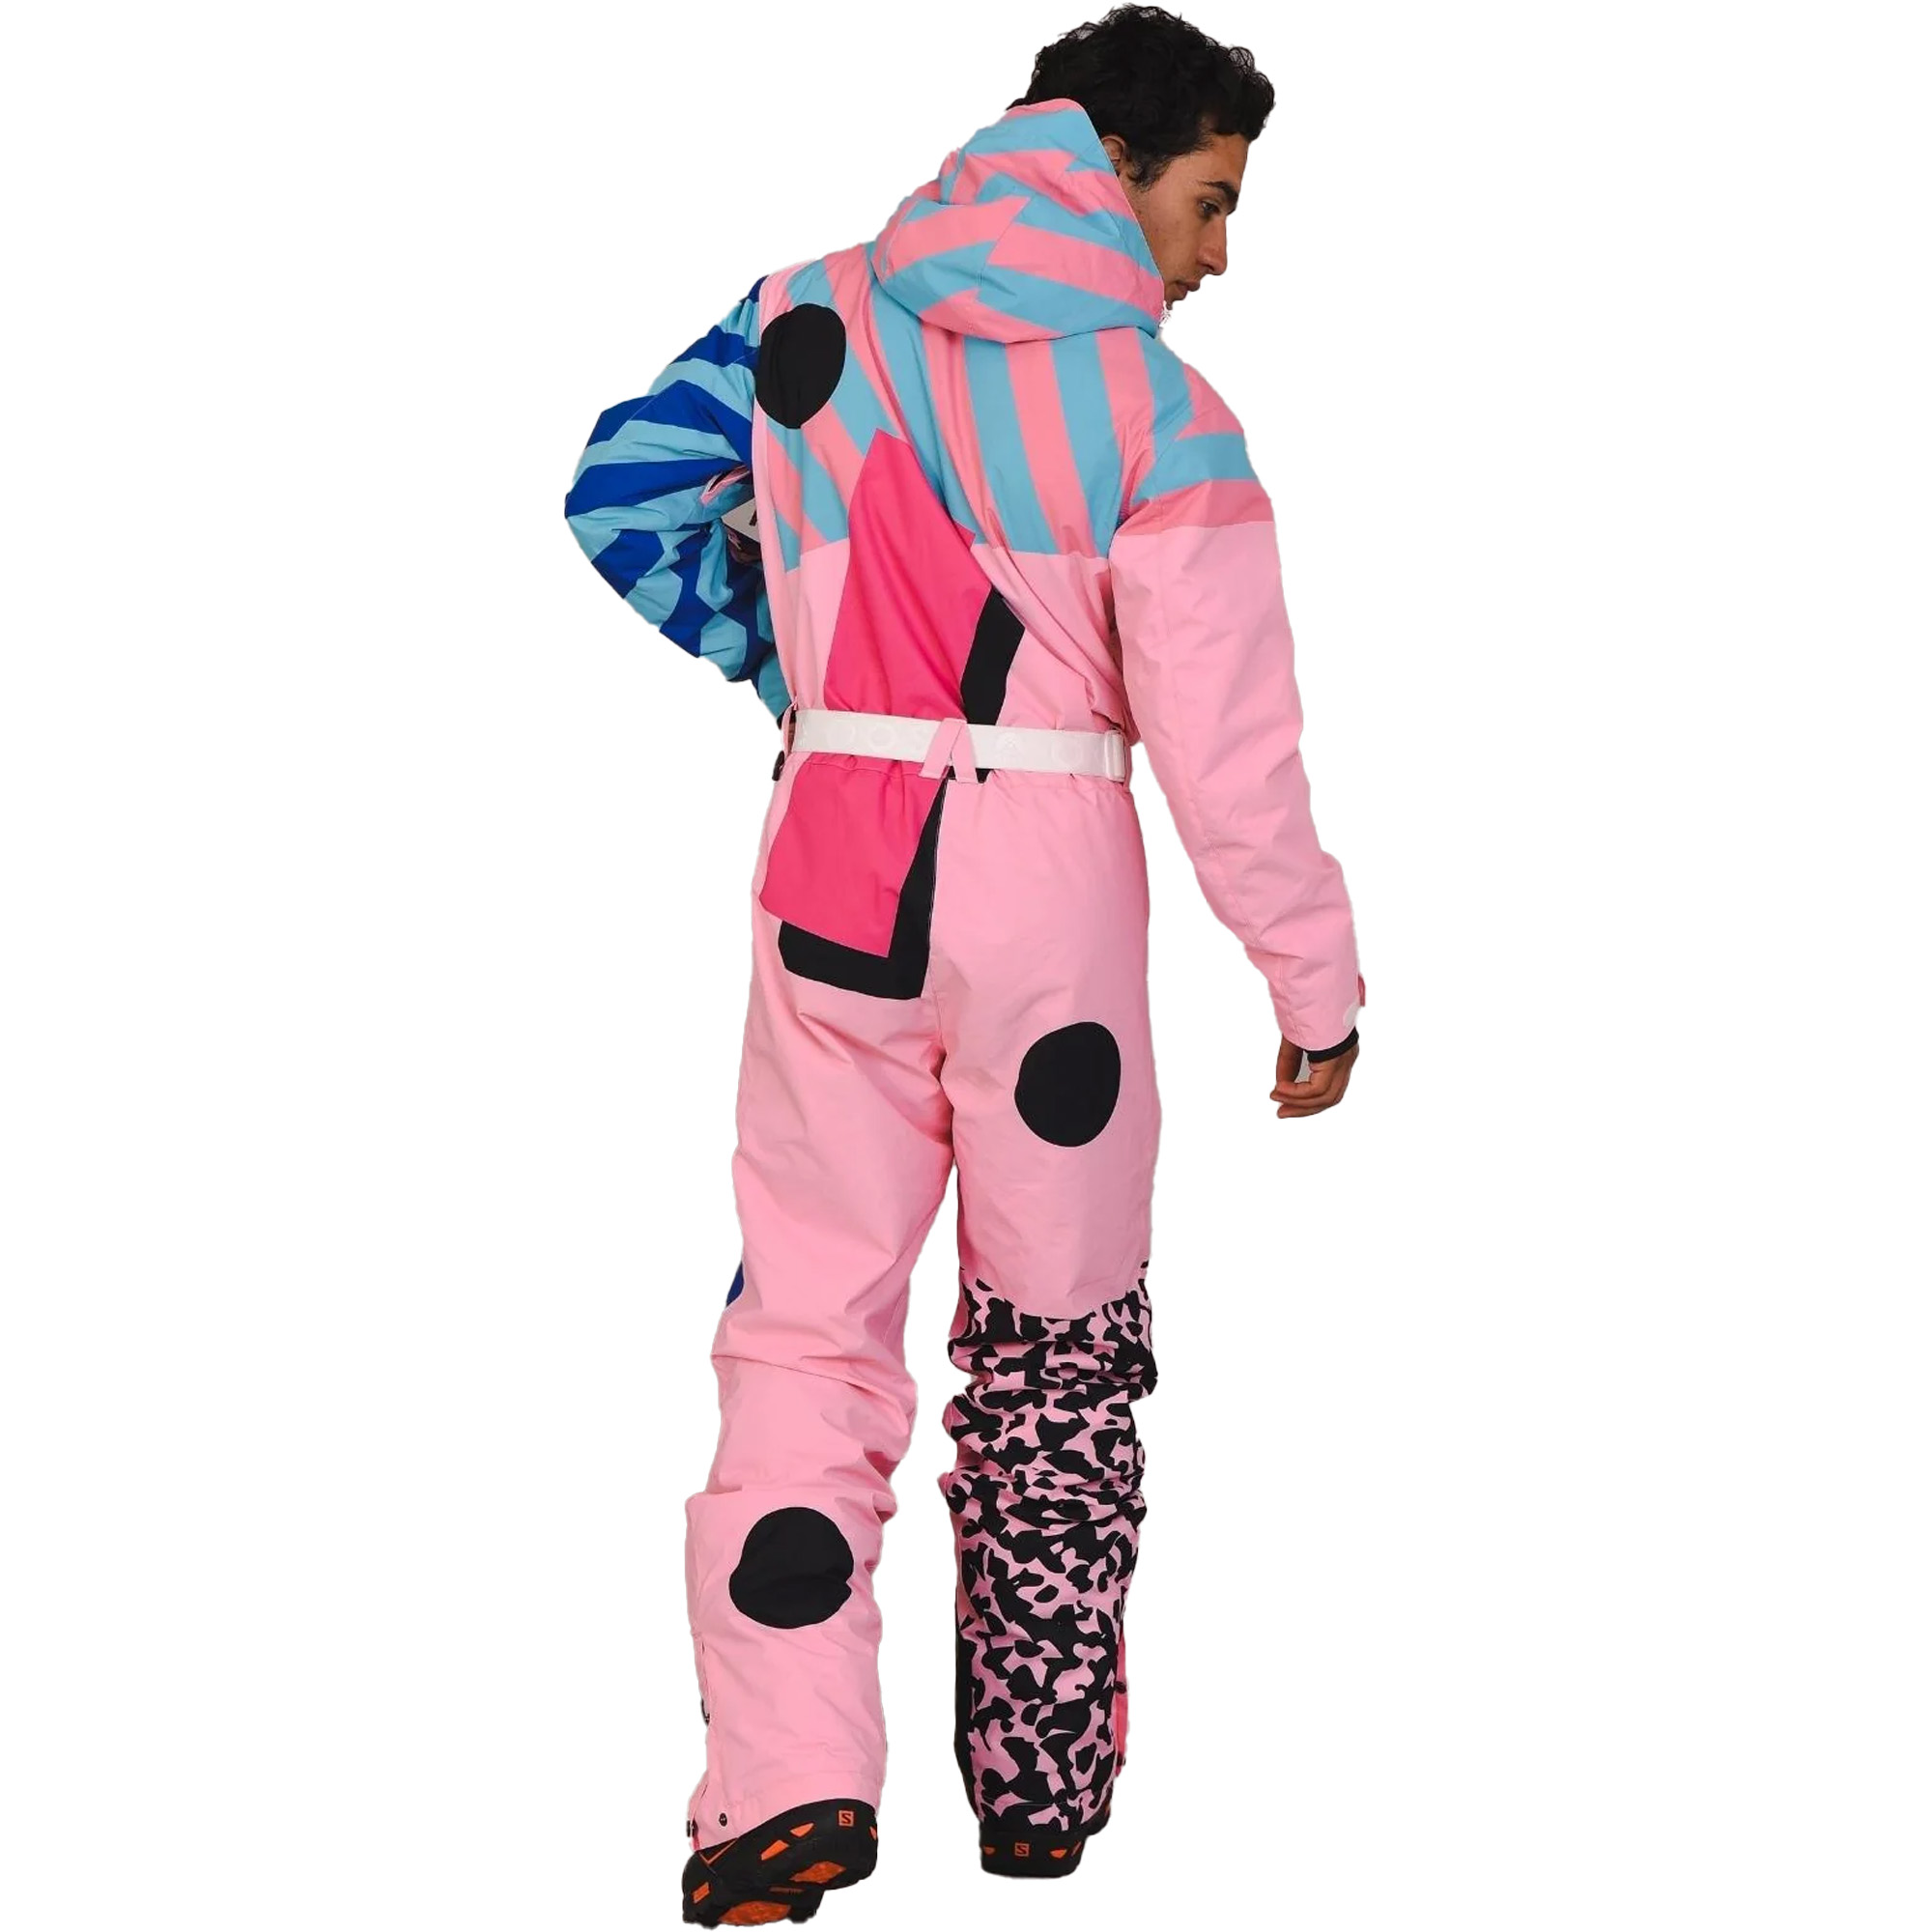 OOSC Penfold In Pink Unisex One Piece Ski Suit